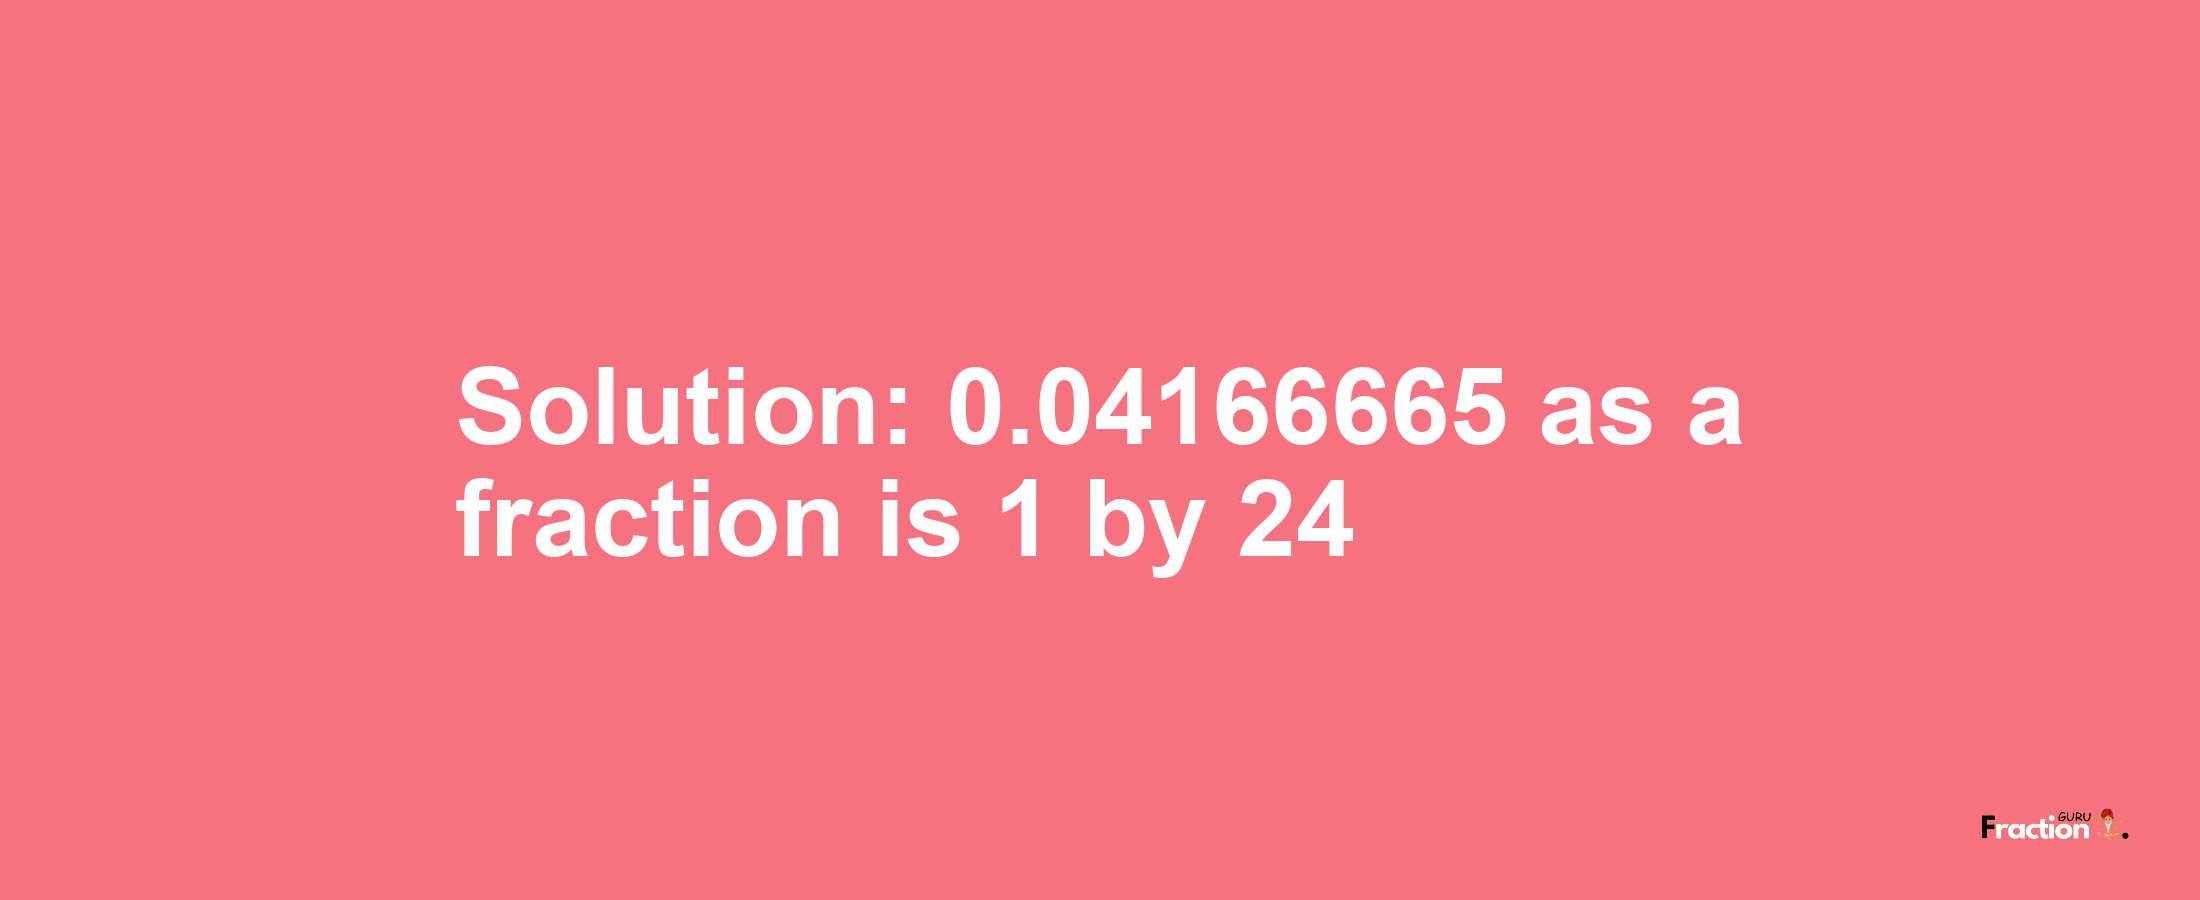 Solution:0.04166665 as a fraction is 1/24